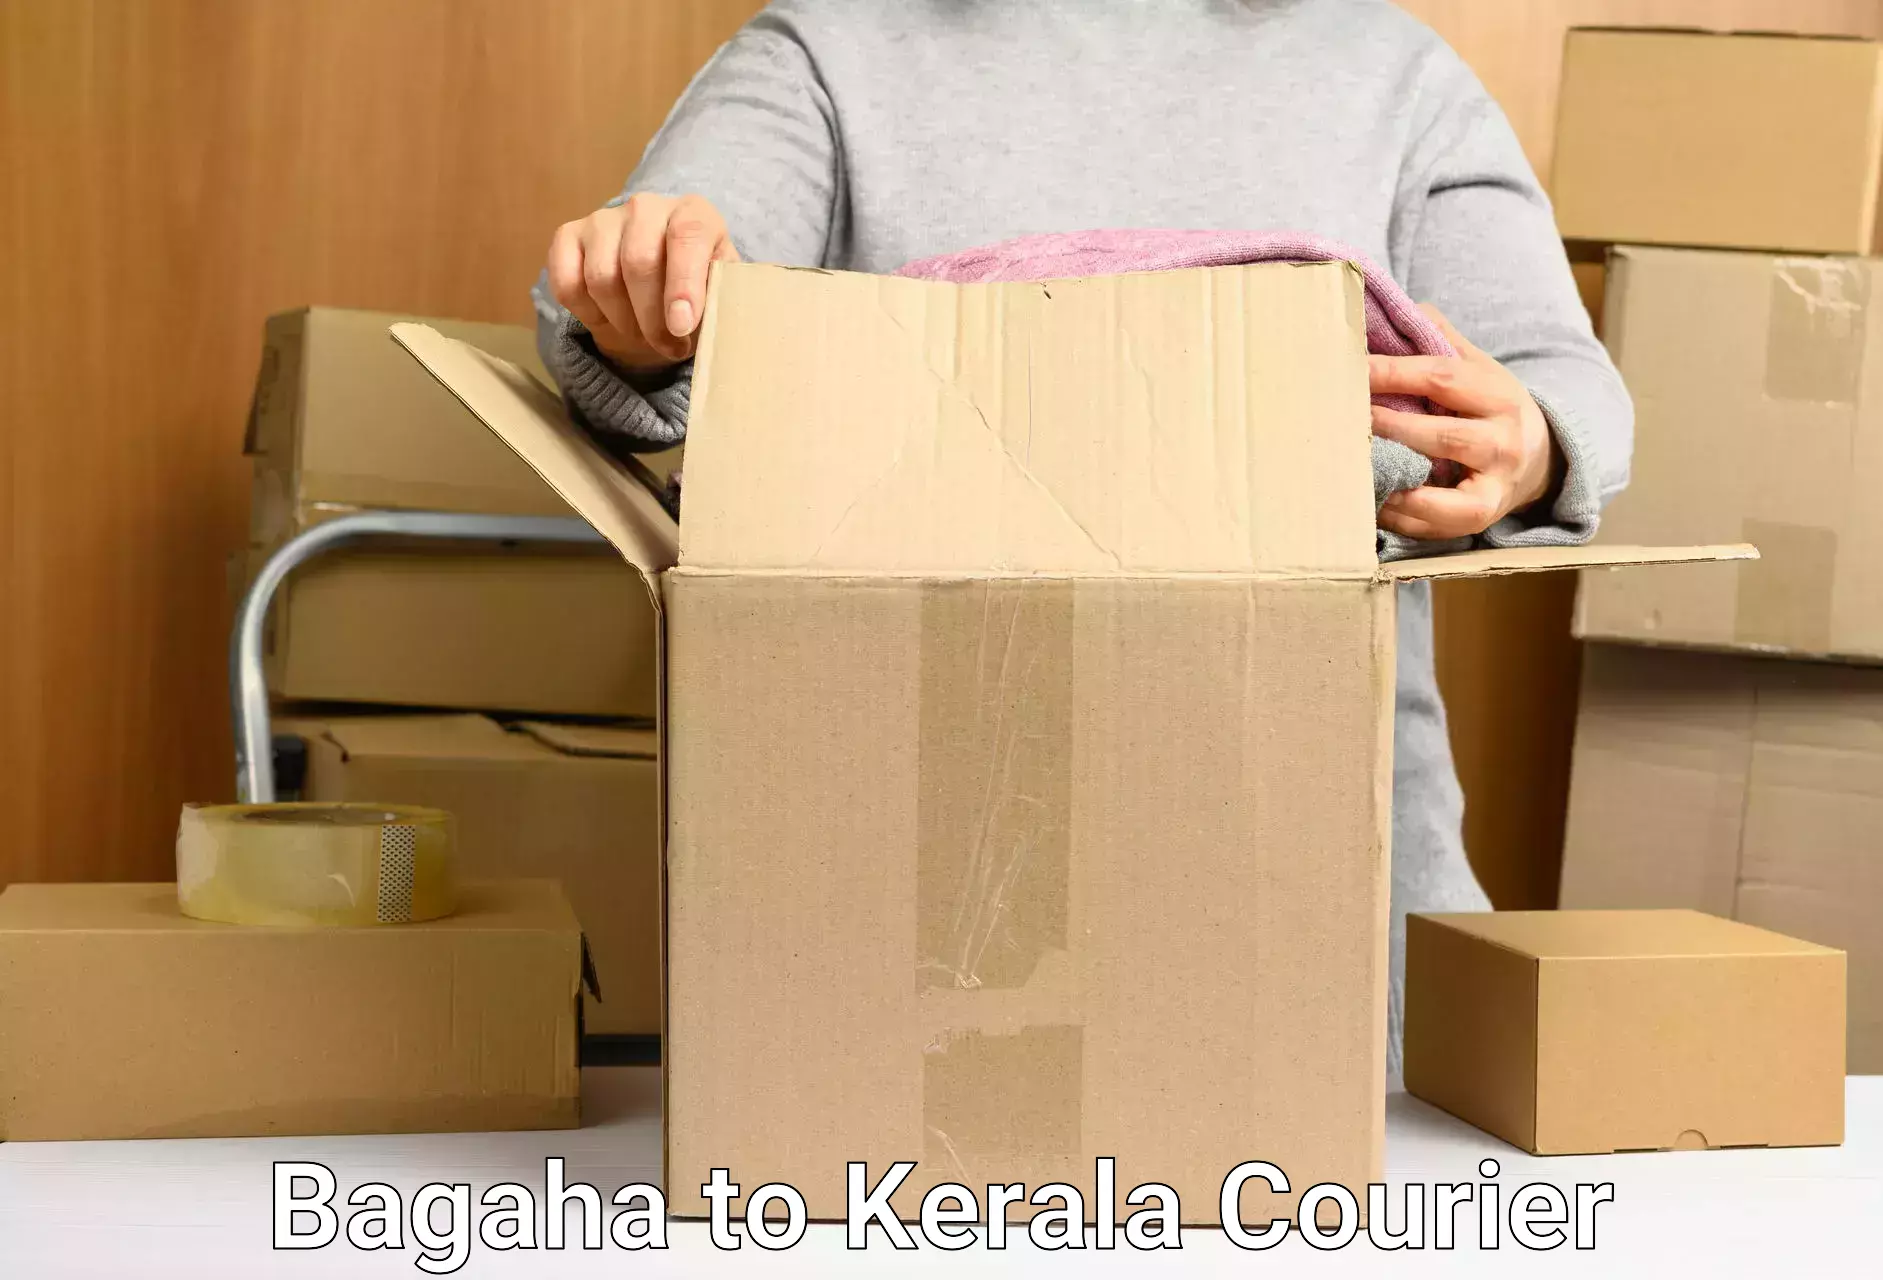 On-call courier service Bagaha to Cochin Port Kochi